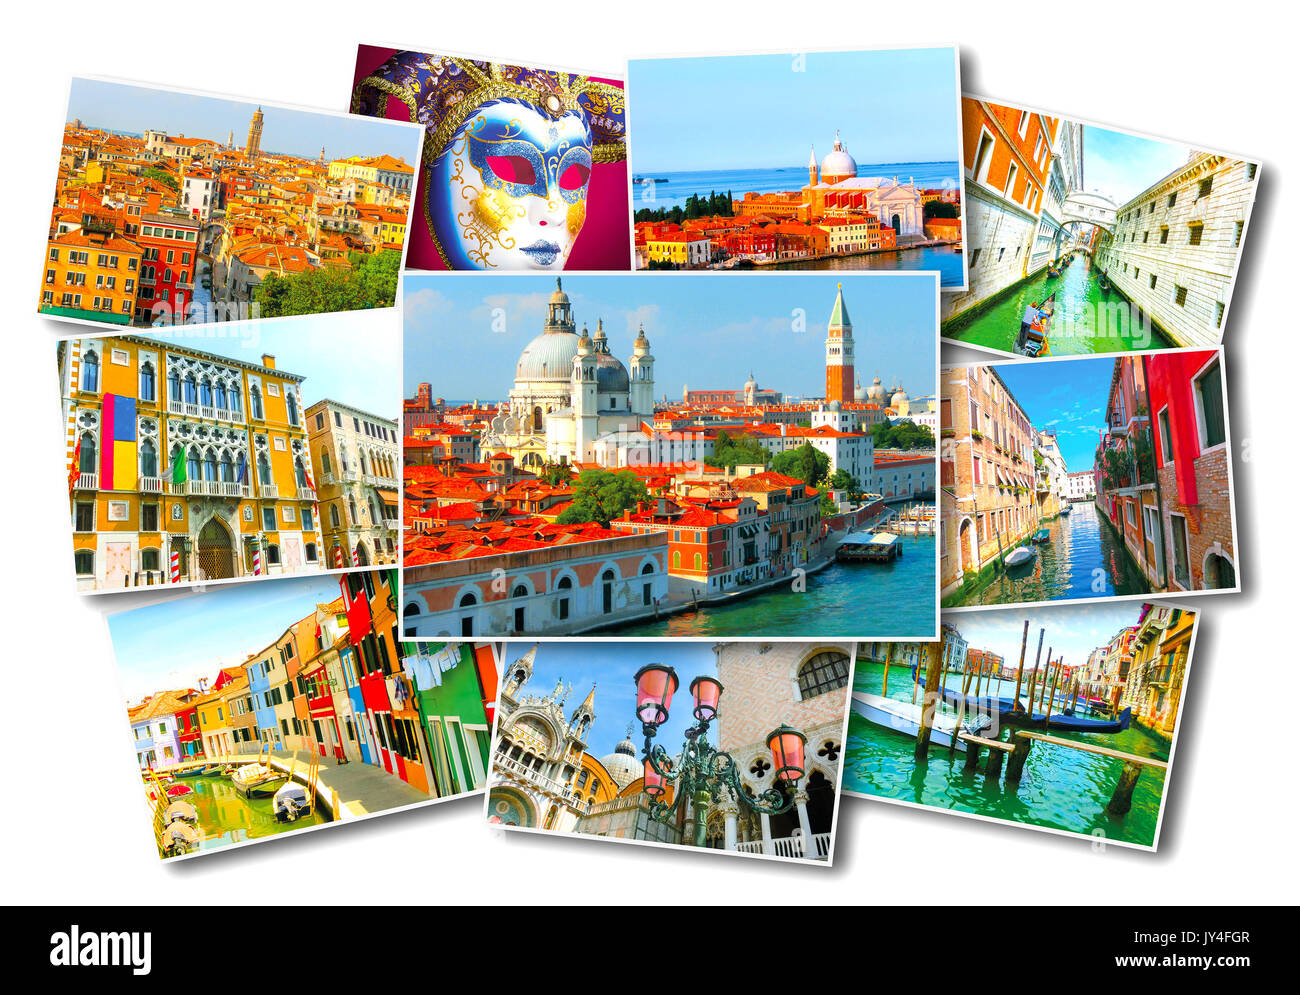 Collage of images from Venice Stock Photo